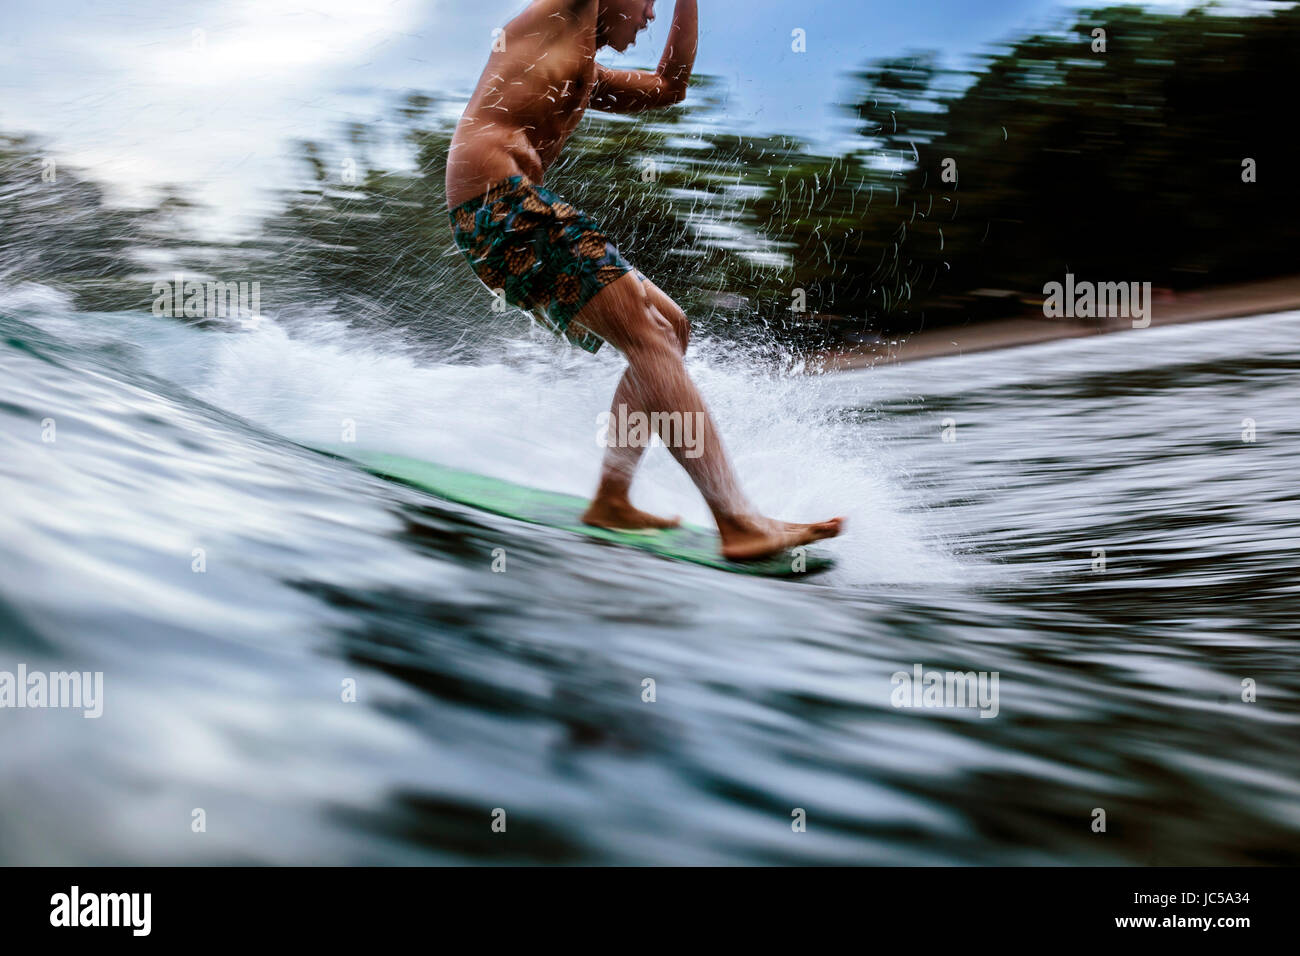 Male surfer on wave Stock Photo